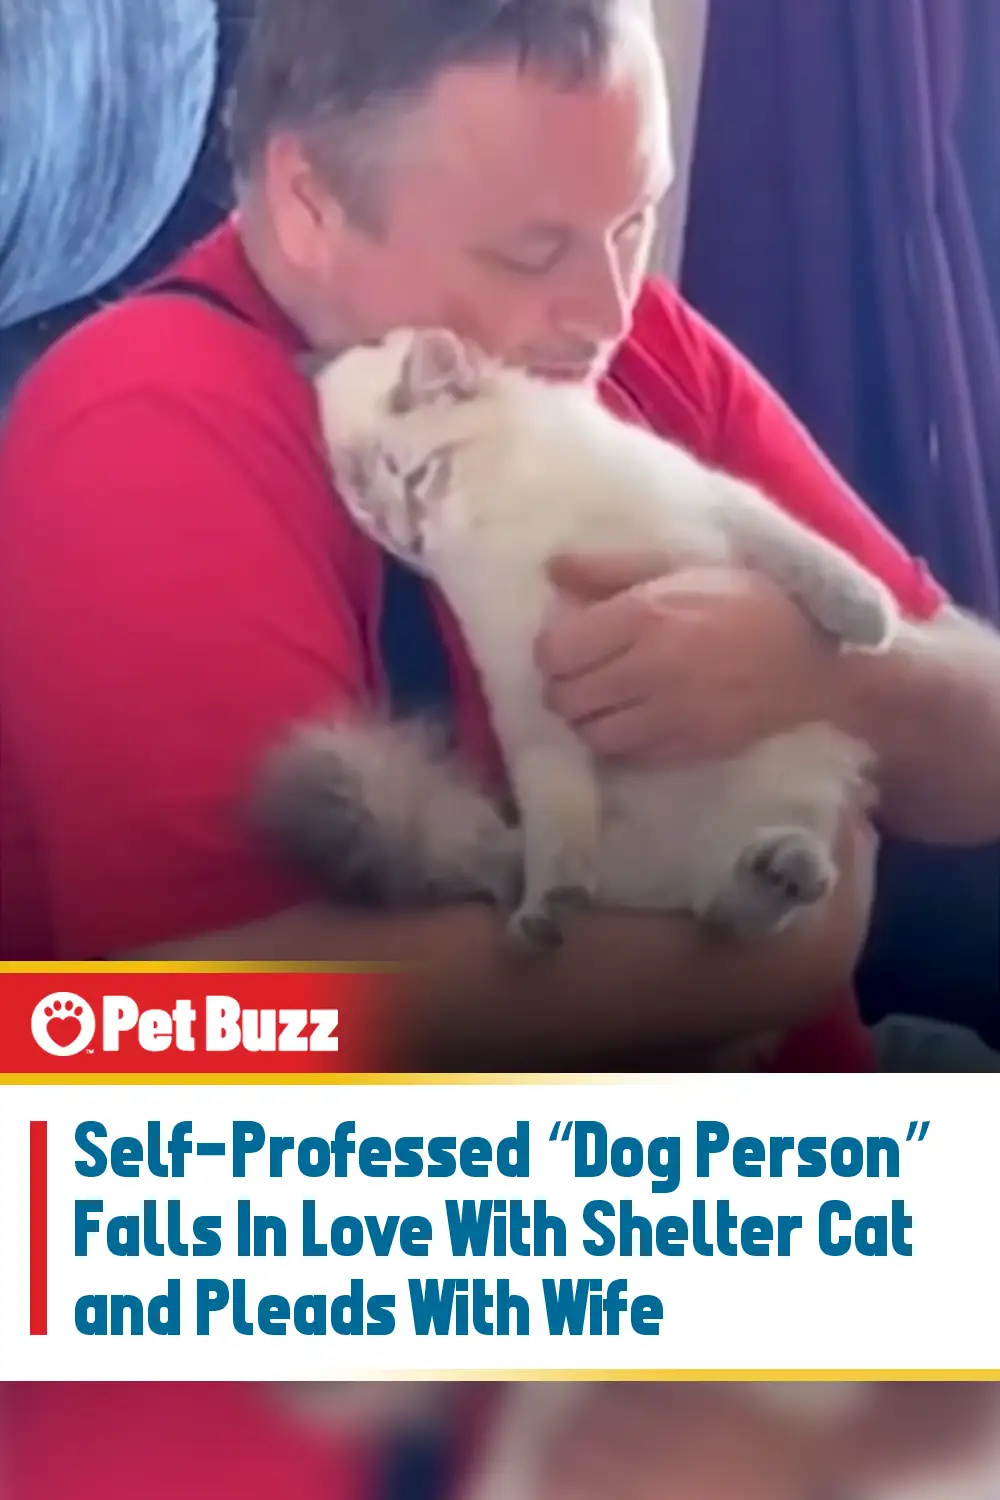 Self-Professed “Dog Person” Falls In Love With Shelter Cat and Pleads With Wife